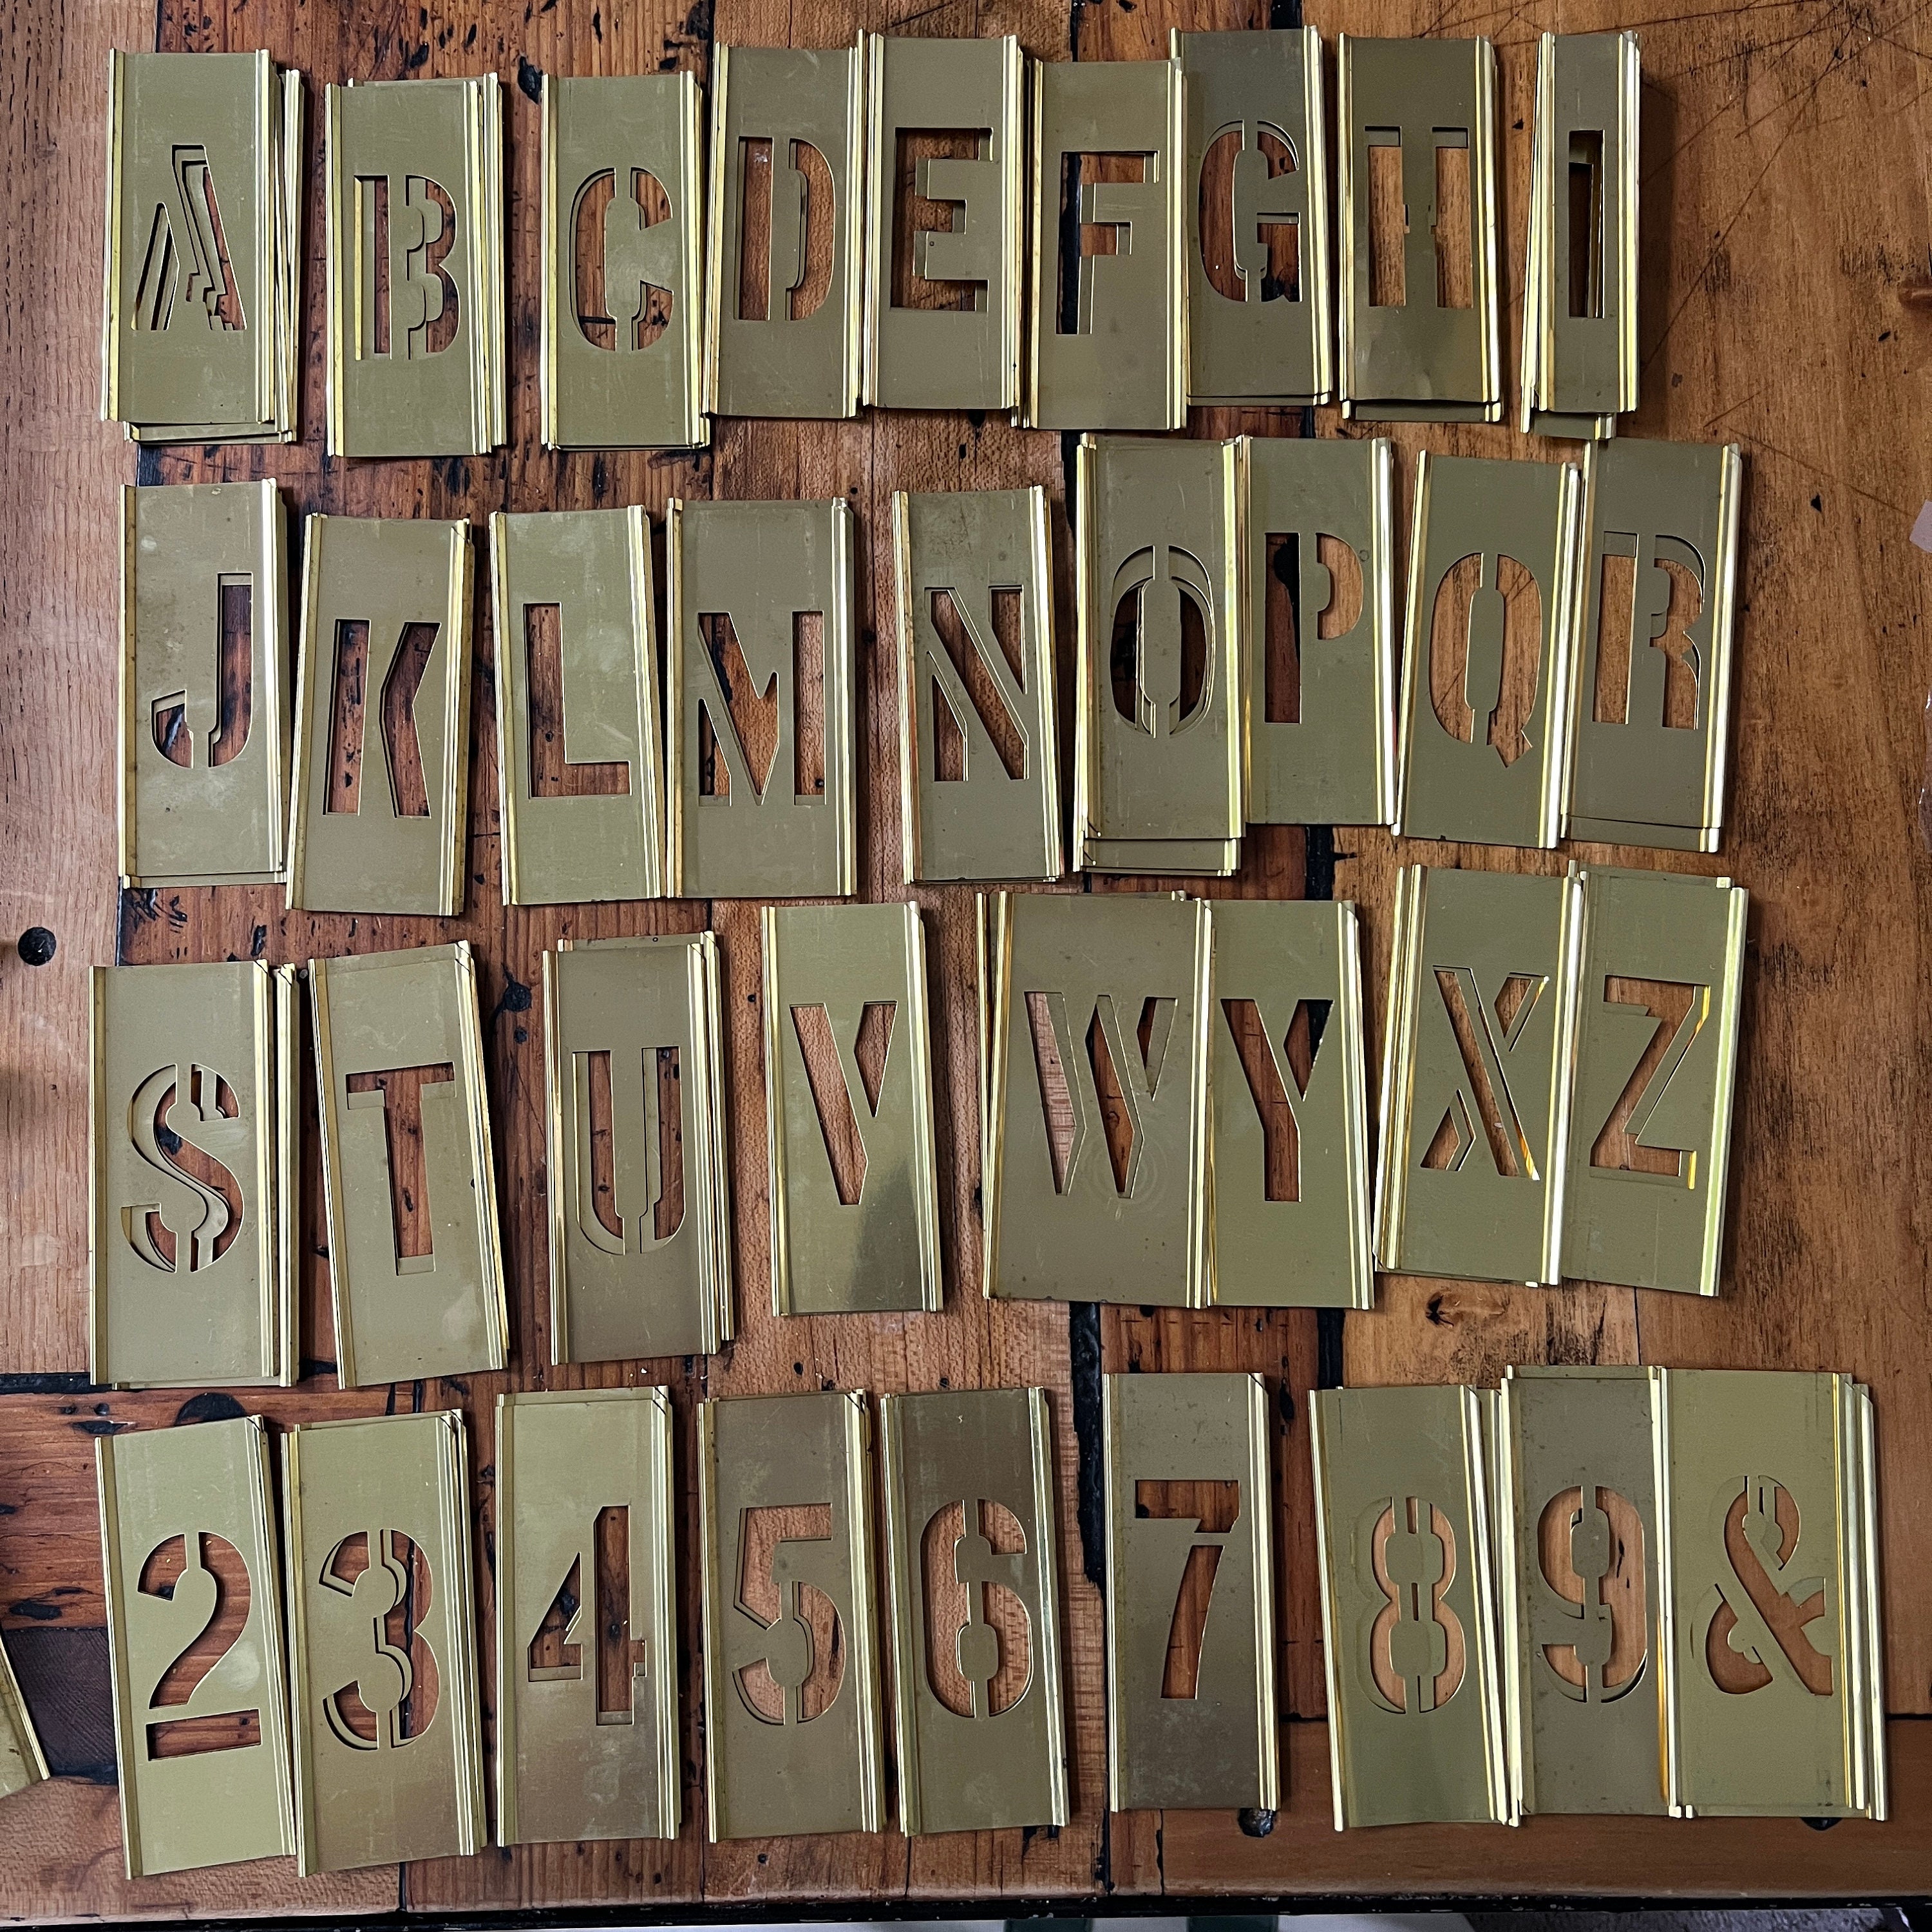 Brass Stencils - Letters and Numbers, 6 S-19651 - Uline